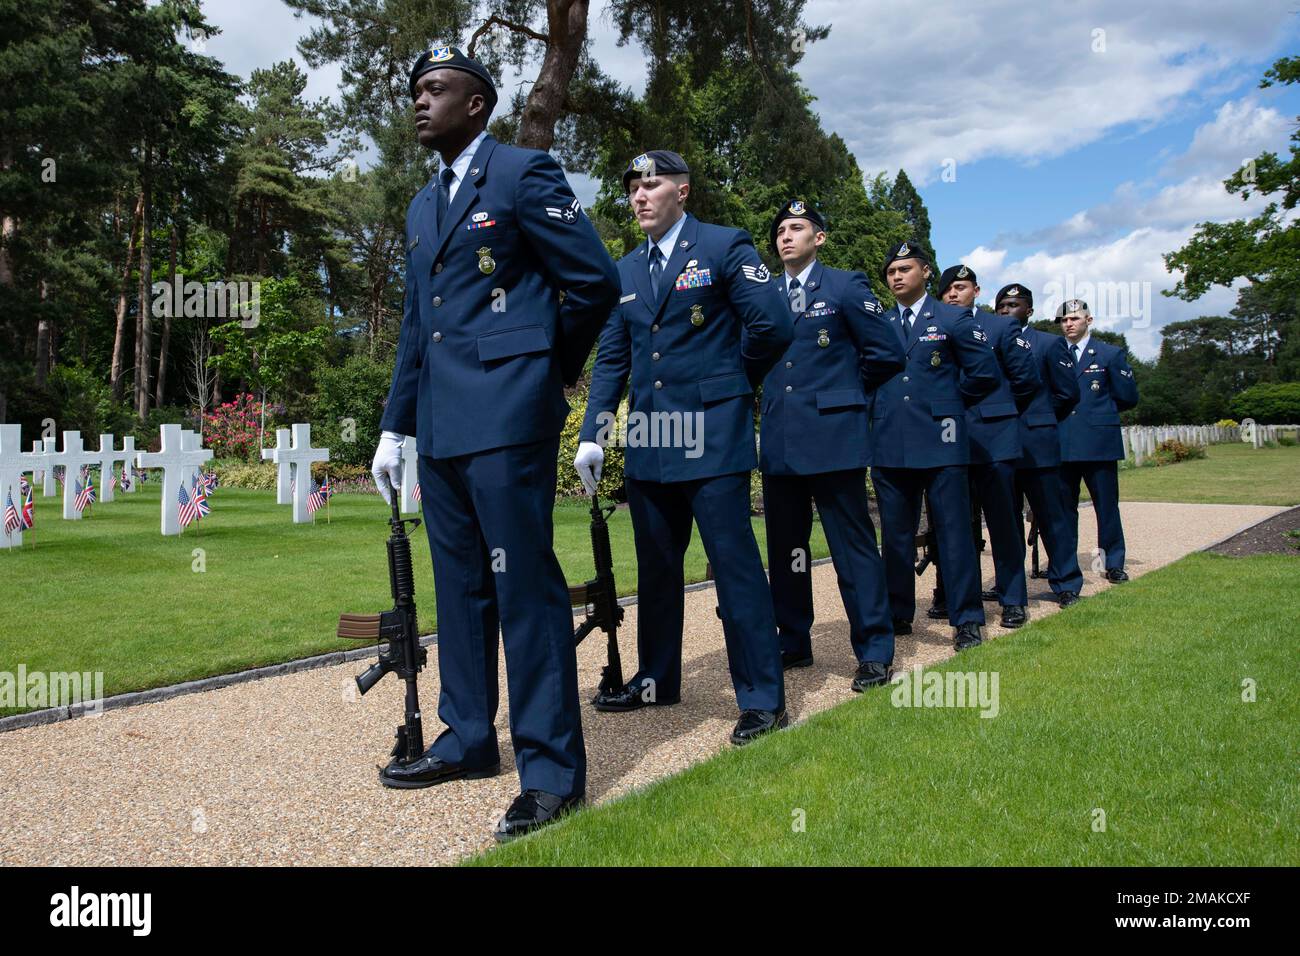 U.S. Air Force 422nd Security Forces Squadron Defenders prepare to perform a 21-gun salute during a Memorial Day ceremony at the Brookwood American Military Cemetery, England, May 29, 2022. Memorial Day provides us a solemn opportunity to remember our fallen brothers and sisters in arms, reflect upon their courageous sacrifice, and show gratitude for the freedom they gave their lives to defend. It also affords us the opportunity to pay homage to those families who lost their loved ones in service to the Nation-and continue to feel the full weight of that sacrifice today. Stock Photo